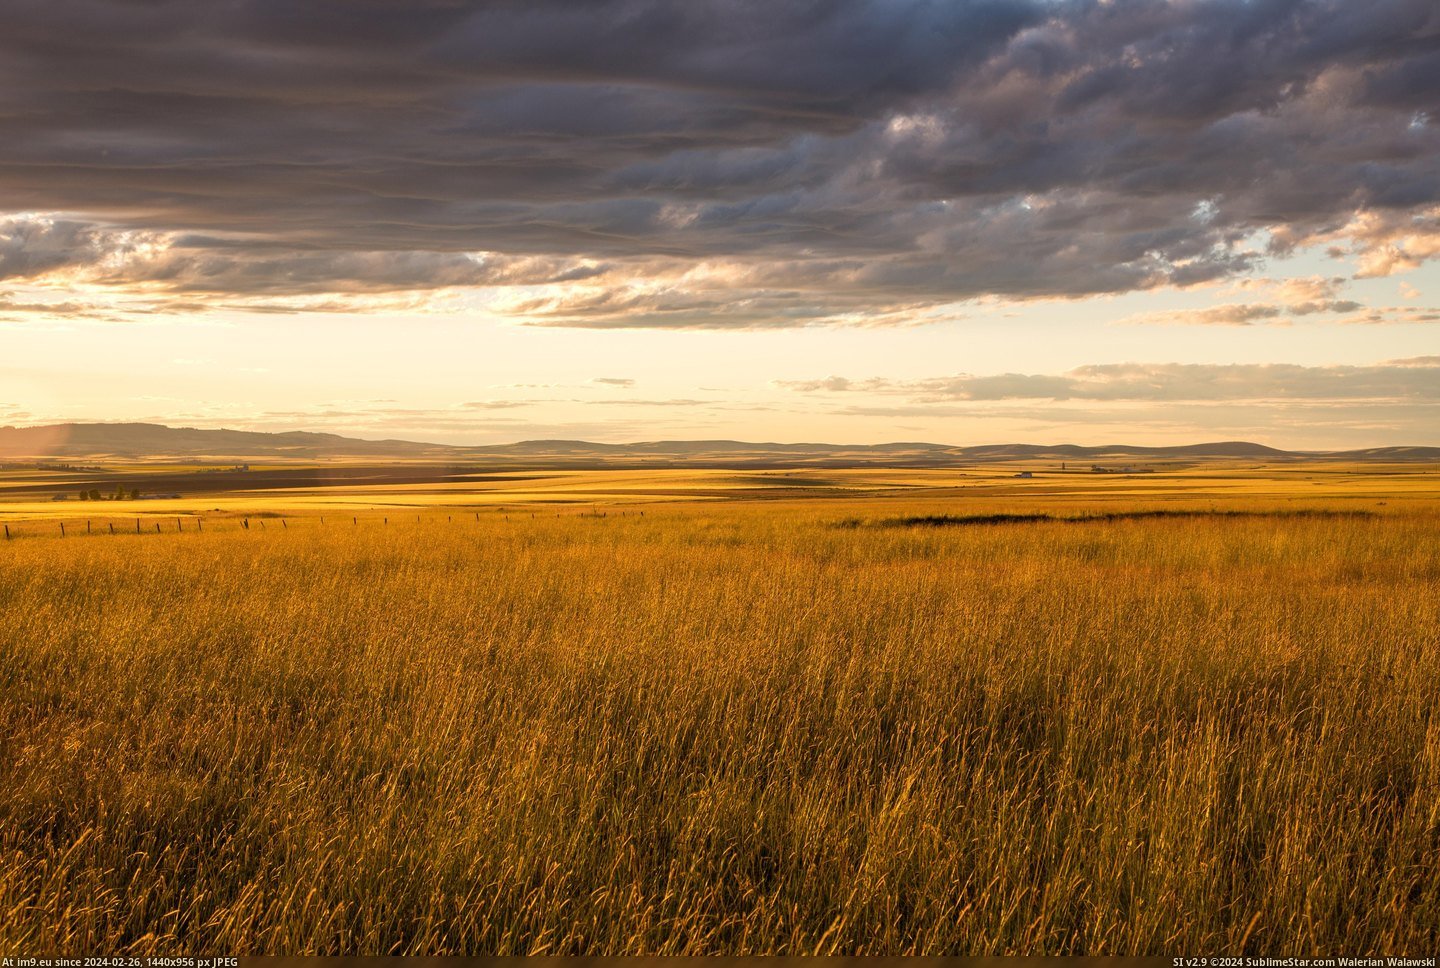 #Sunset #Golden #Wheat #Drenched #5000x3333 #Moscow #Fields [Earthporn] Wheat fields drenched in a golden sunset near Moscow, ID [OC][5000x3333] Pic. (Obraz z album My r/EARTHPORN favs))